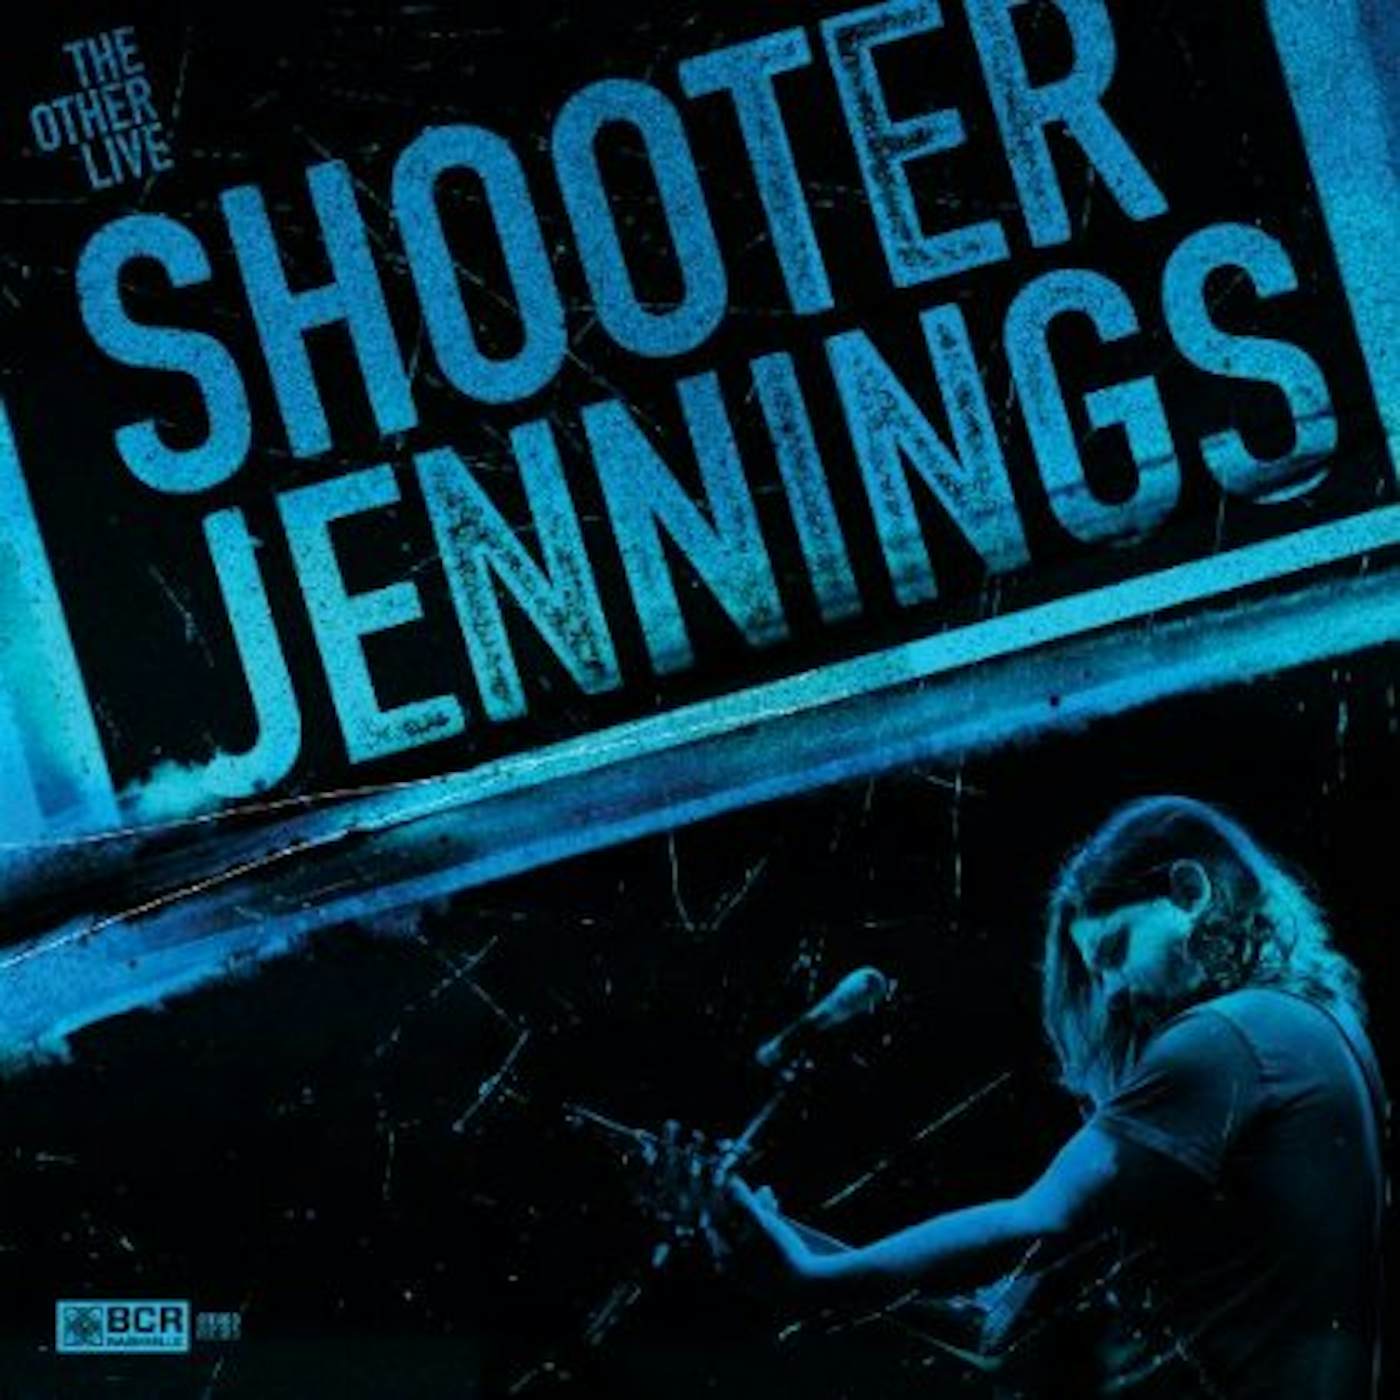 Shooter Jennings OTHER LIVE CD